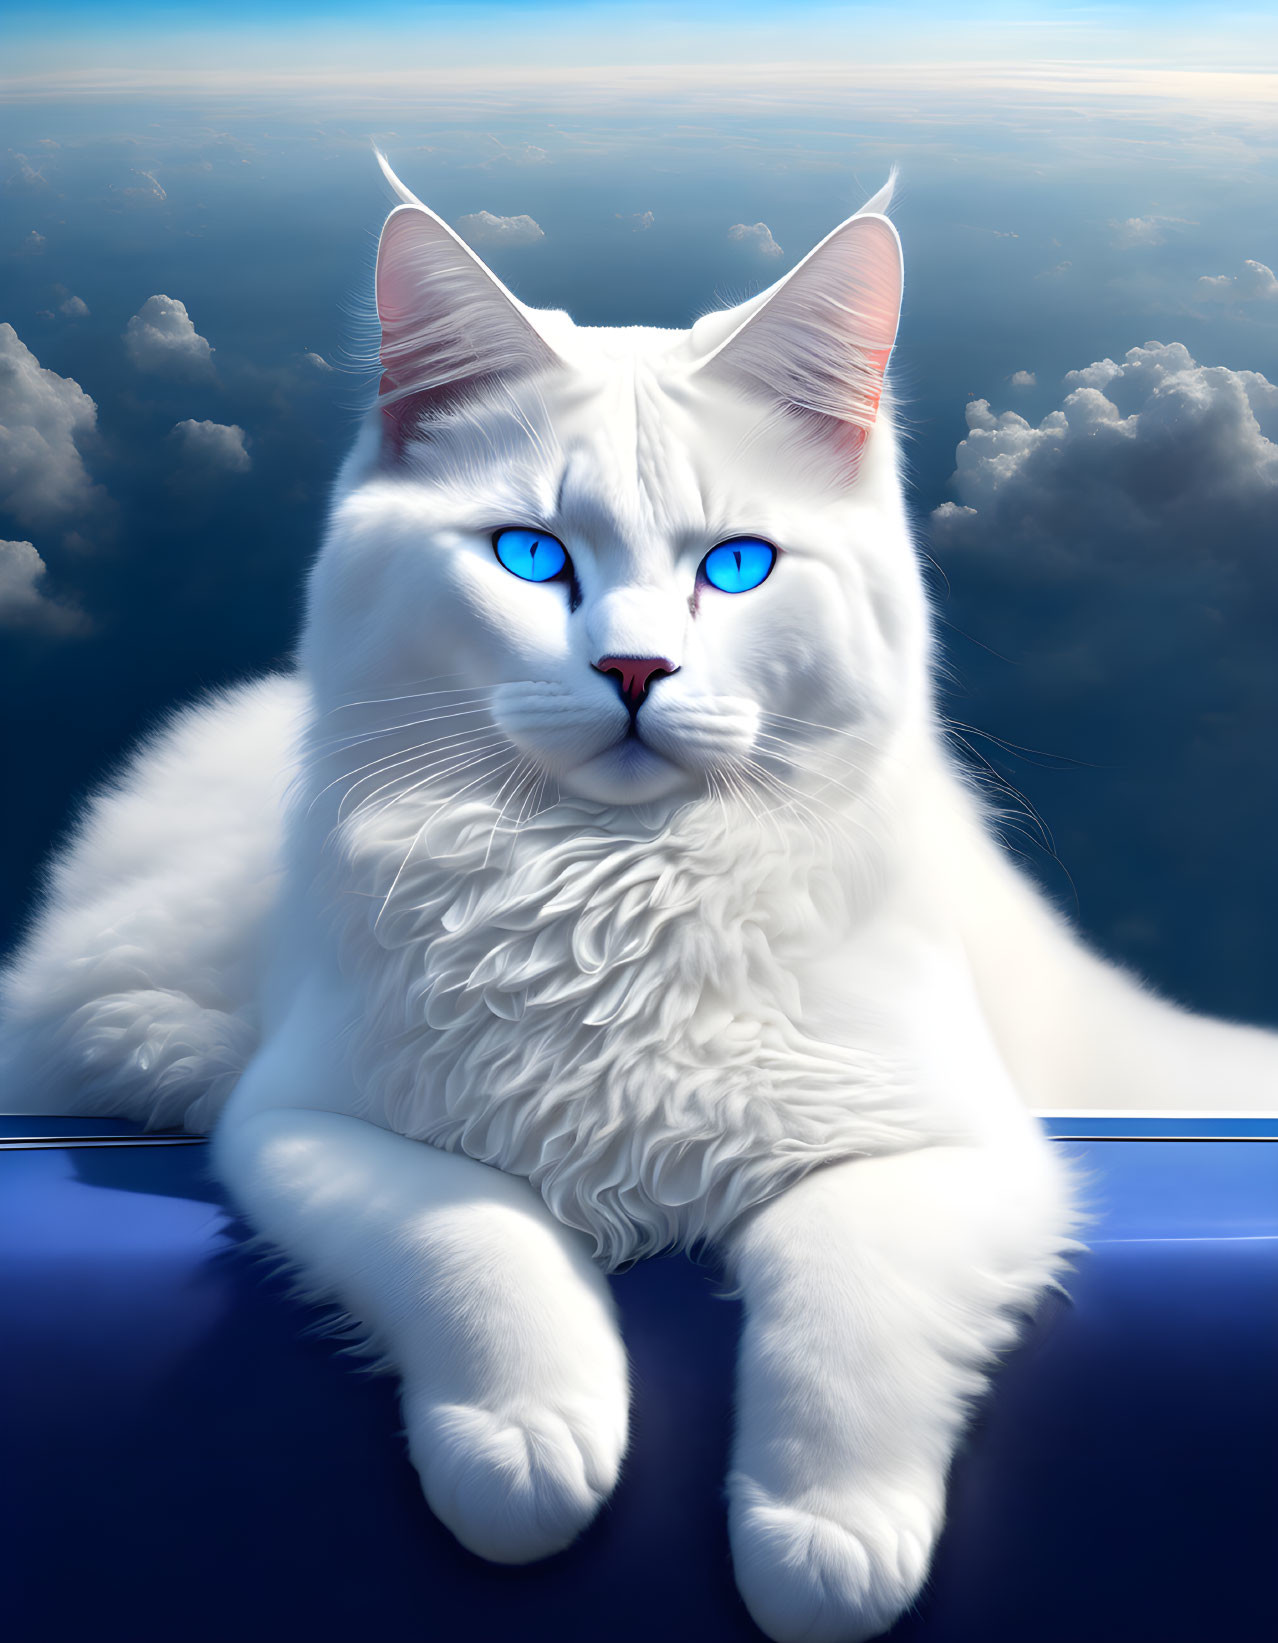 Majestic white cat with blue eyes against blue sky